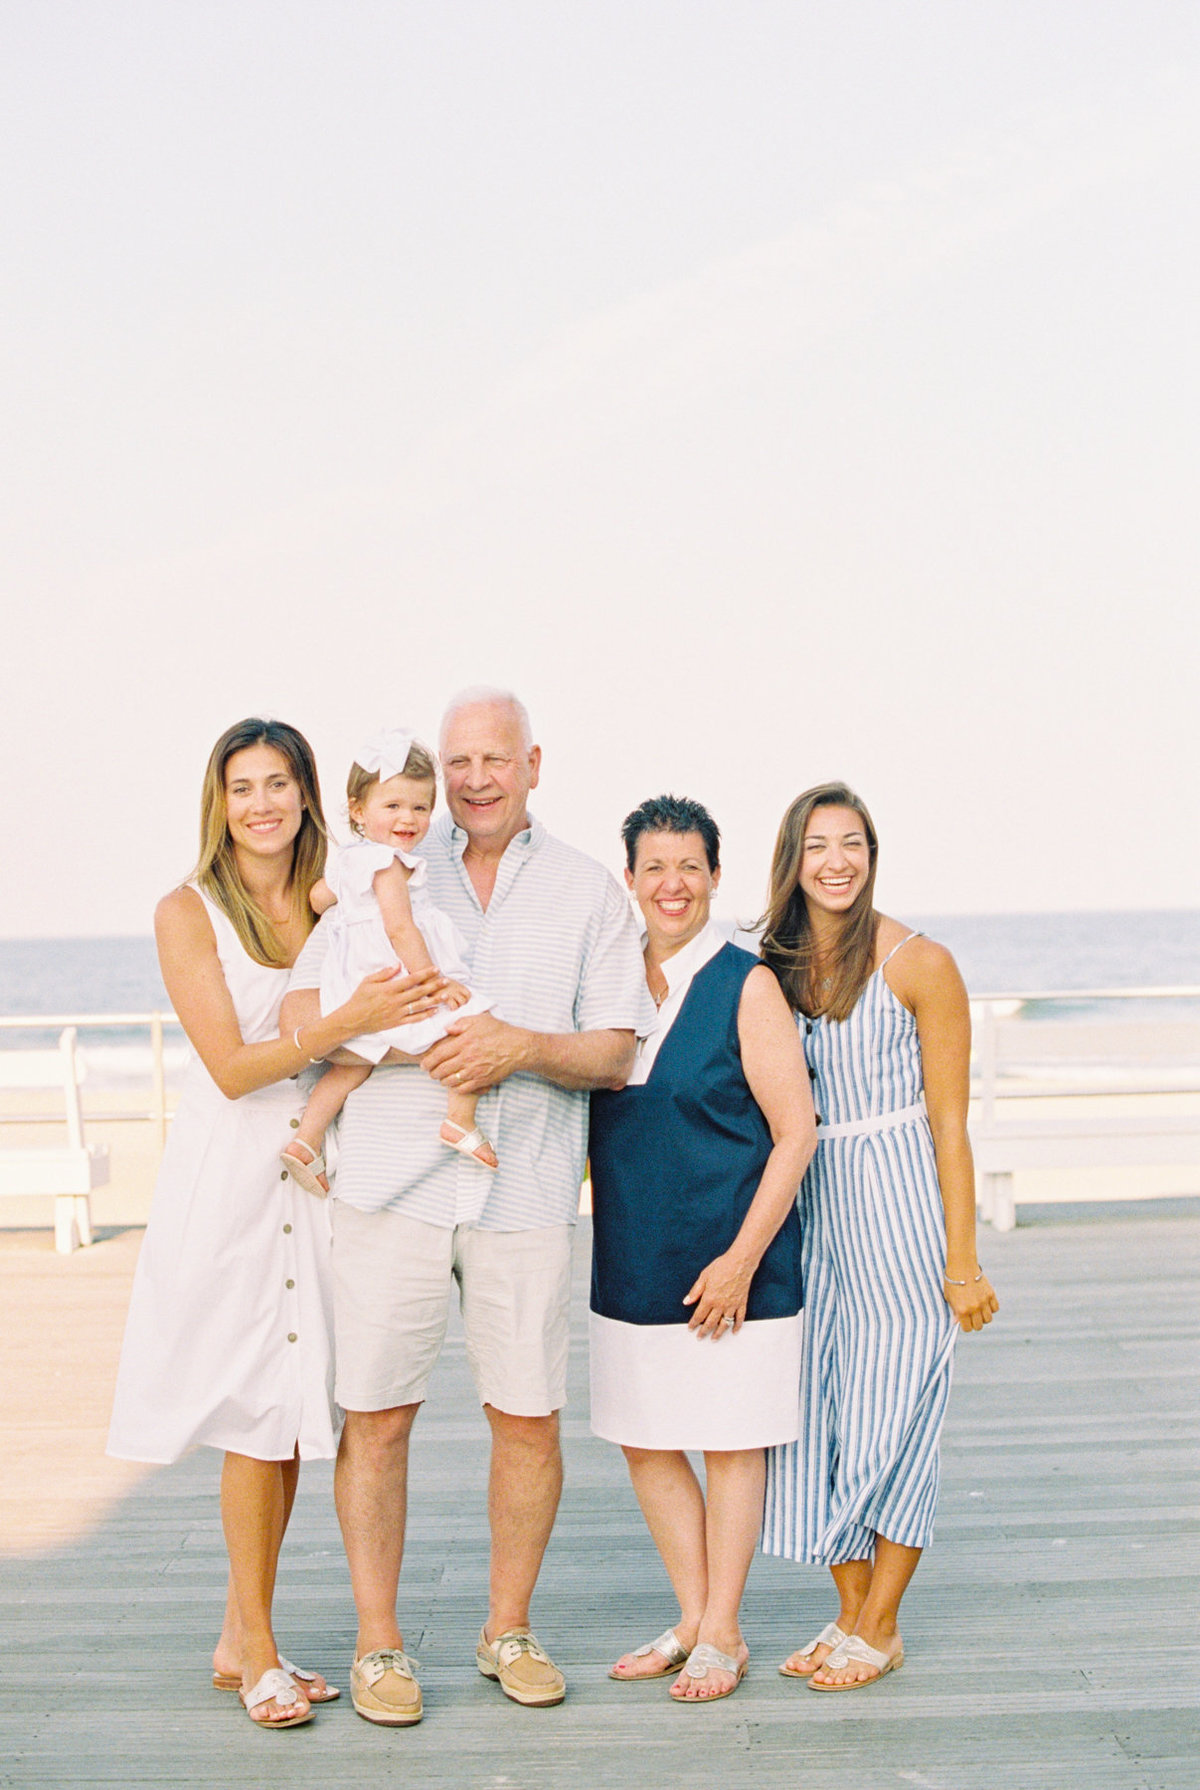 Michelle Behre Photography NJ Fine Art Photographer Seaside Family Lifestyle Family Portrait Session in Avon-by-the-Sea-106